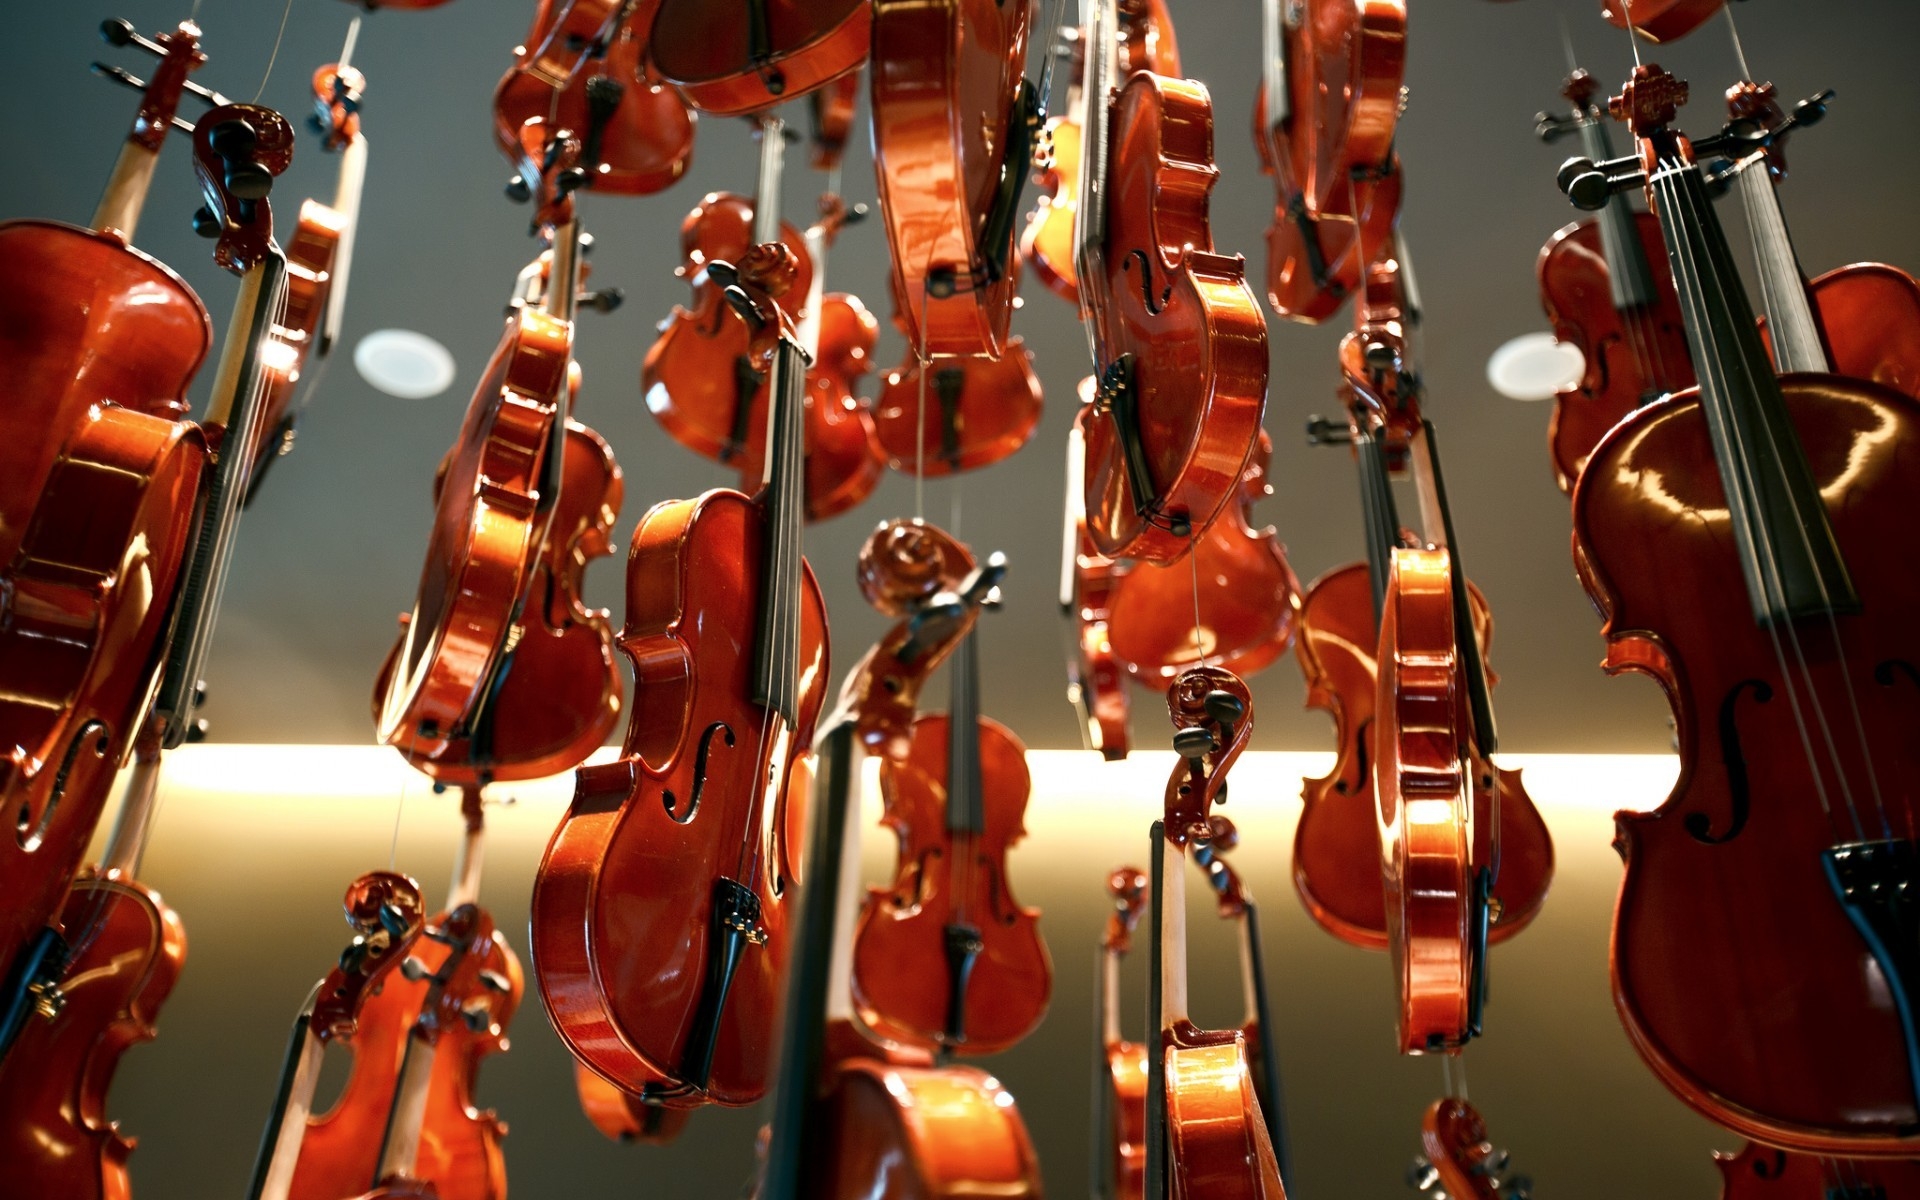 New Violins for 1920 x 1200 widescreen resolution